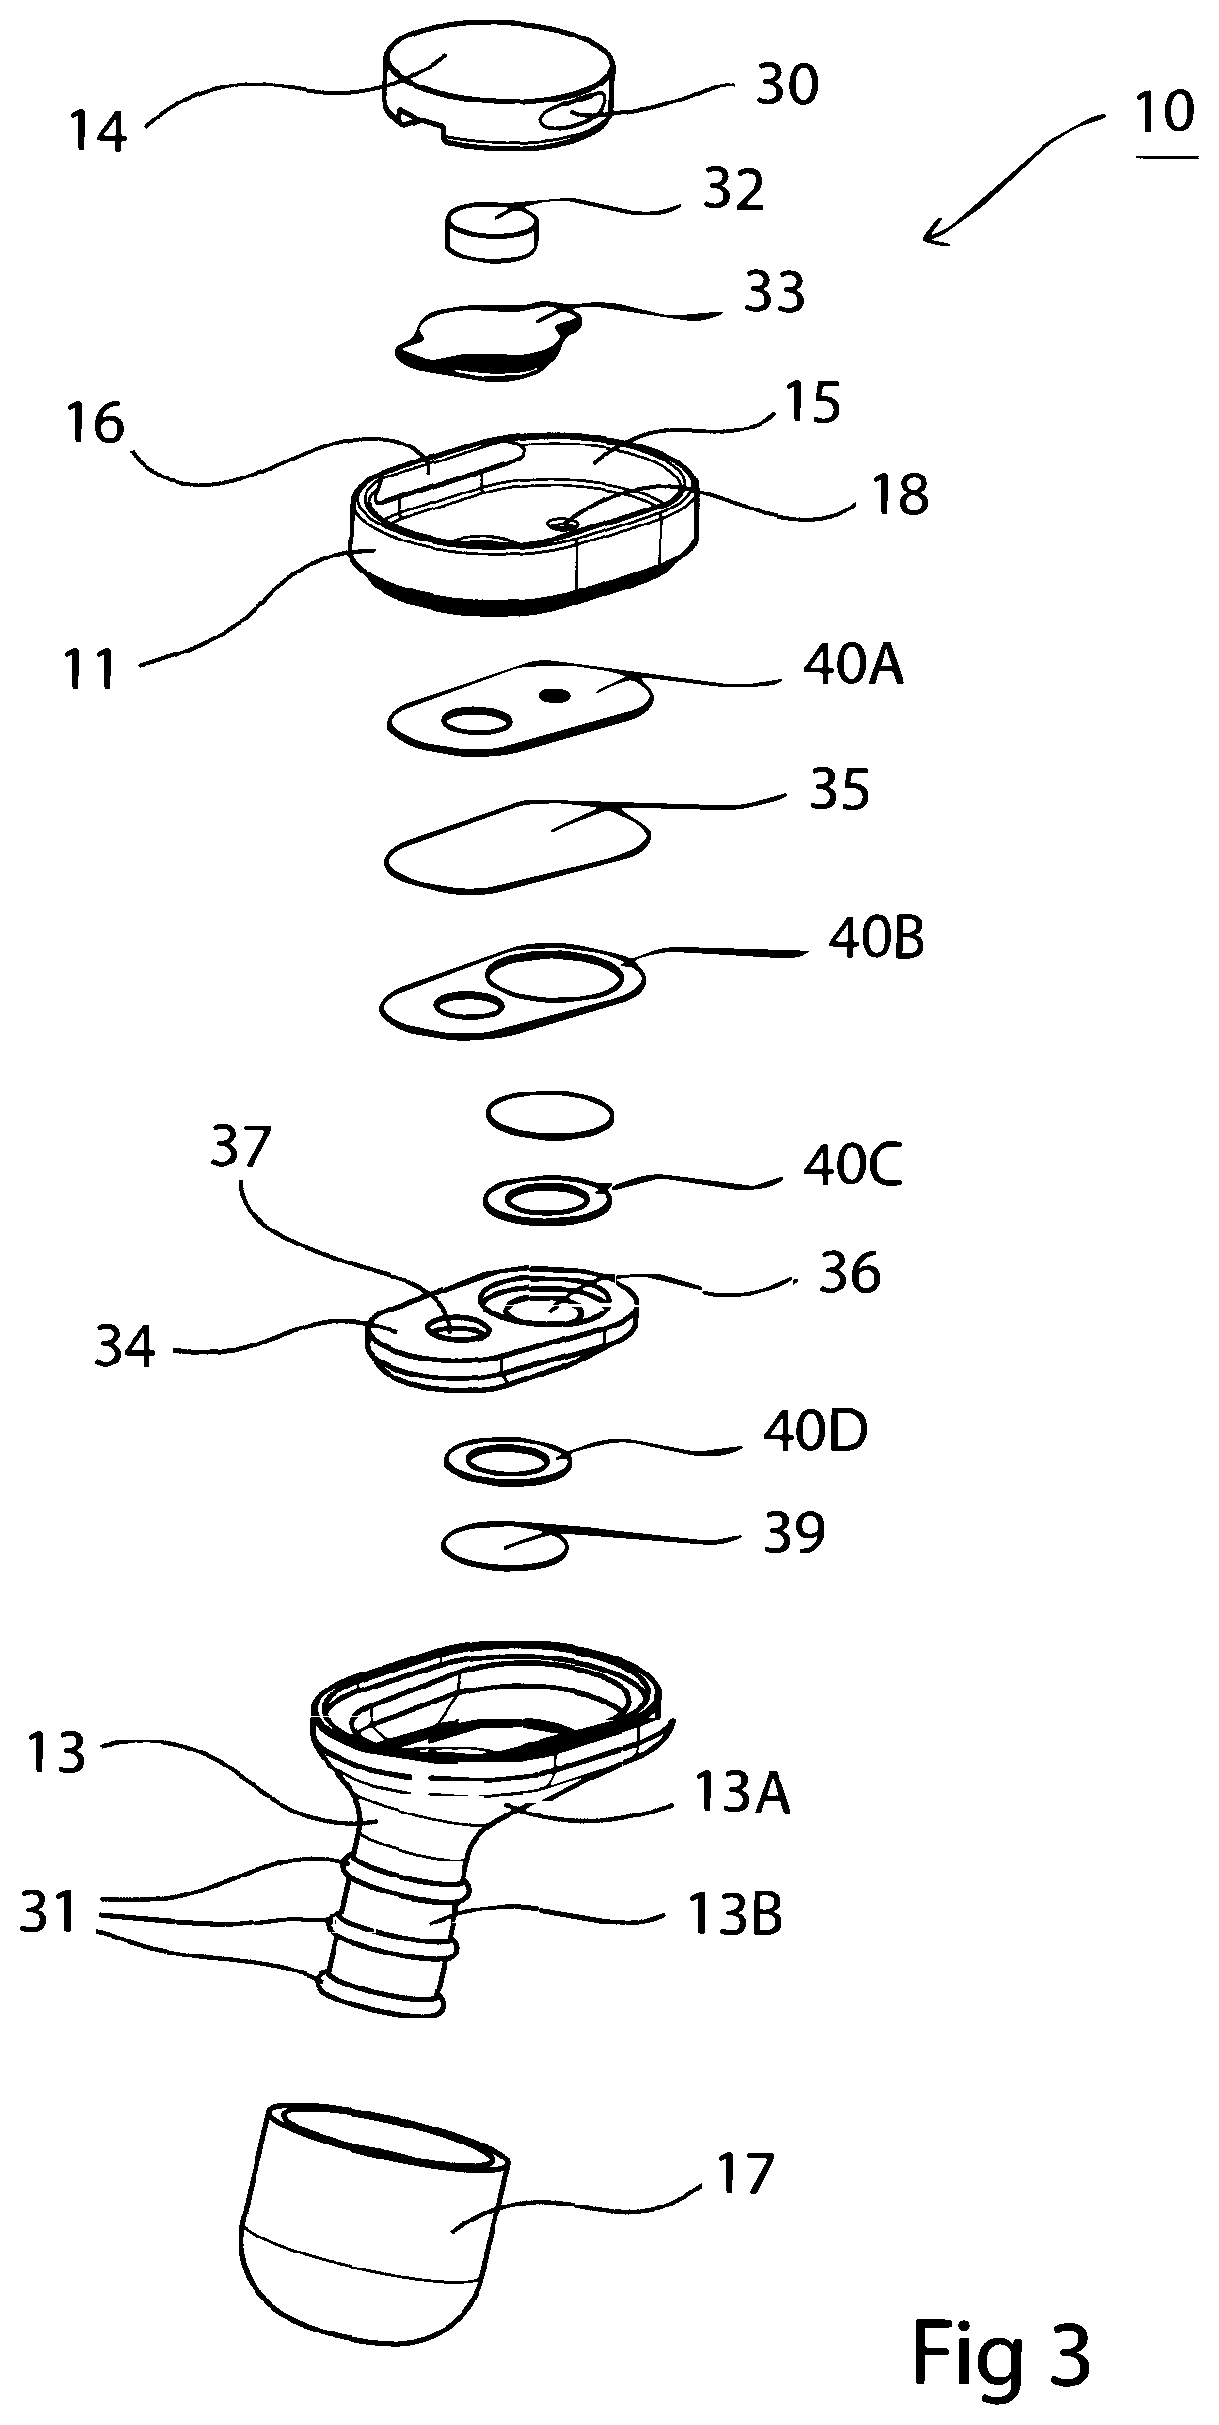 An earplug for selective attenuation of sound and an insert with an acoustic filter for use in an earplug